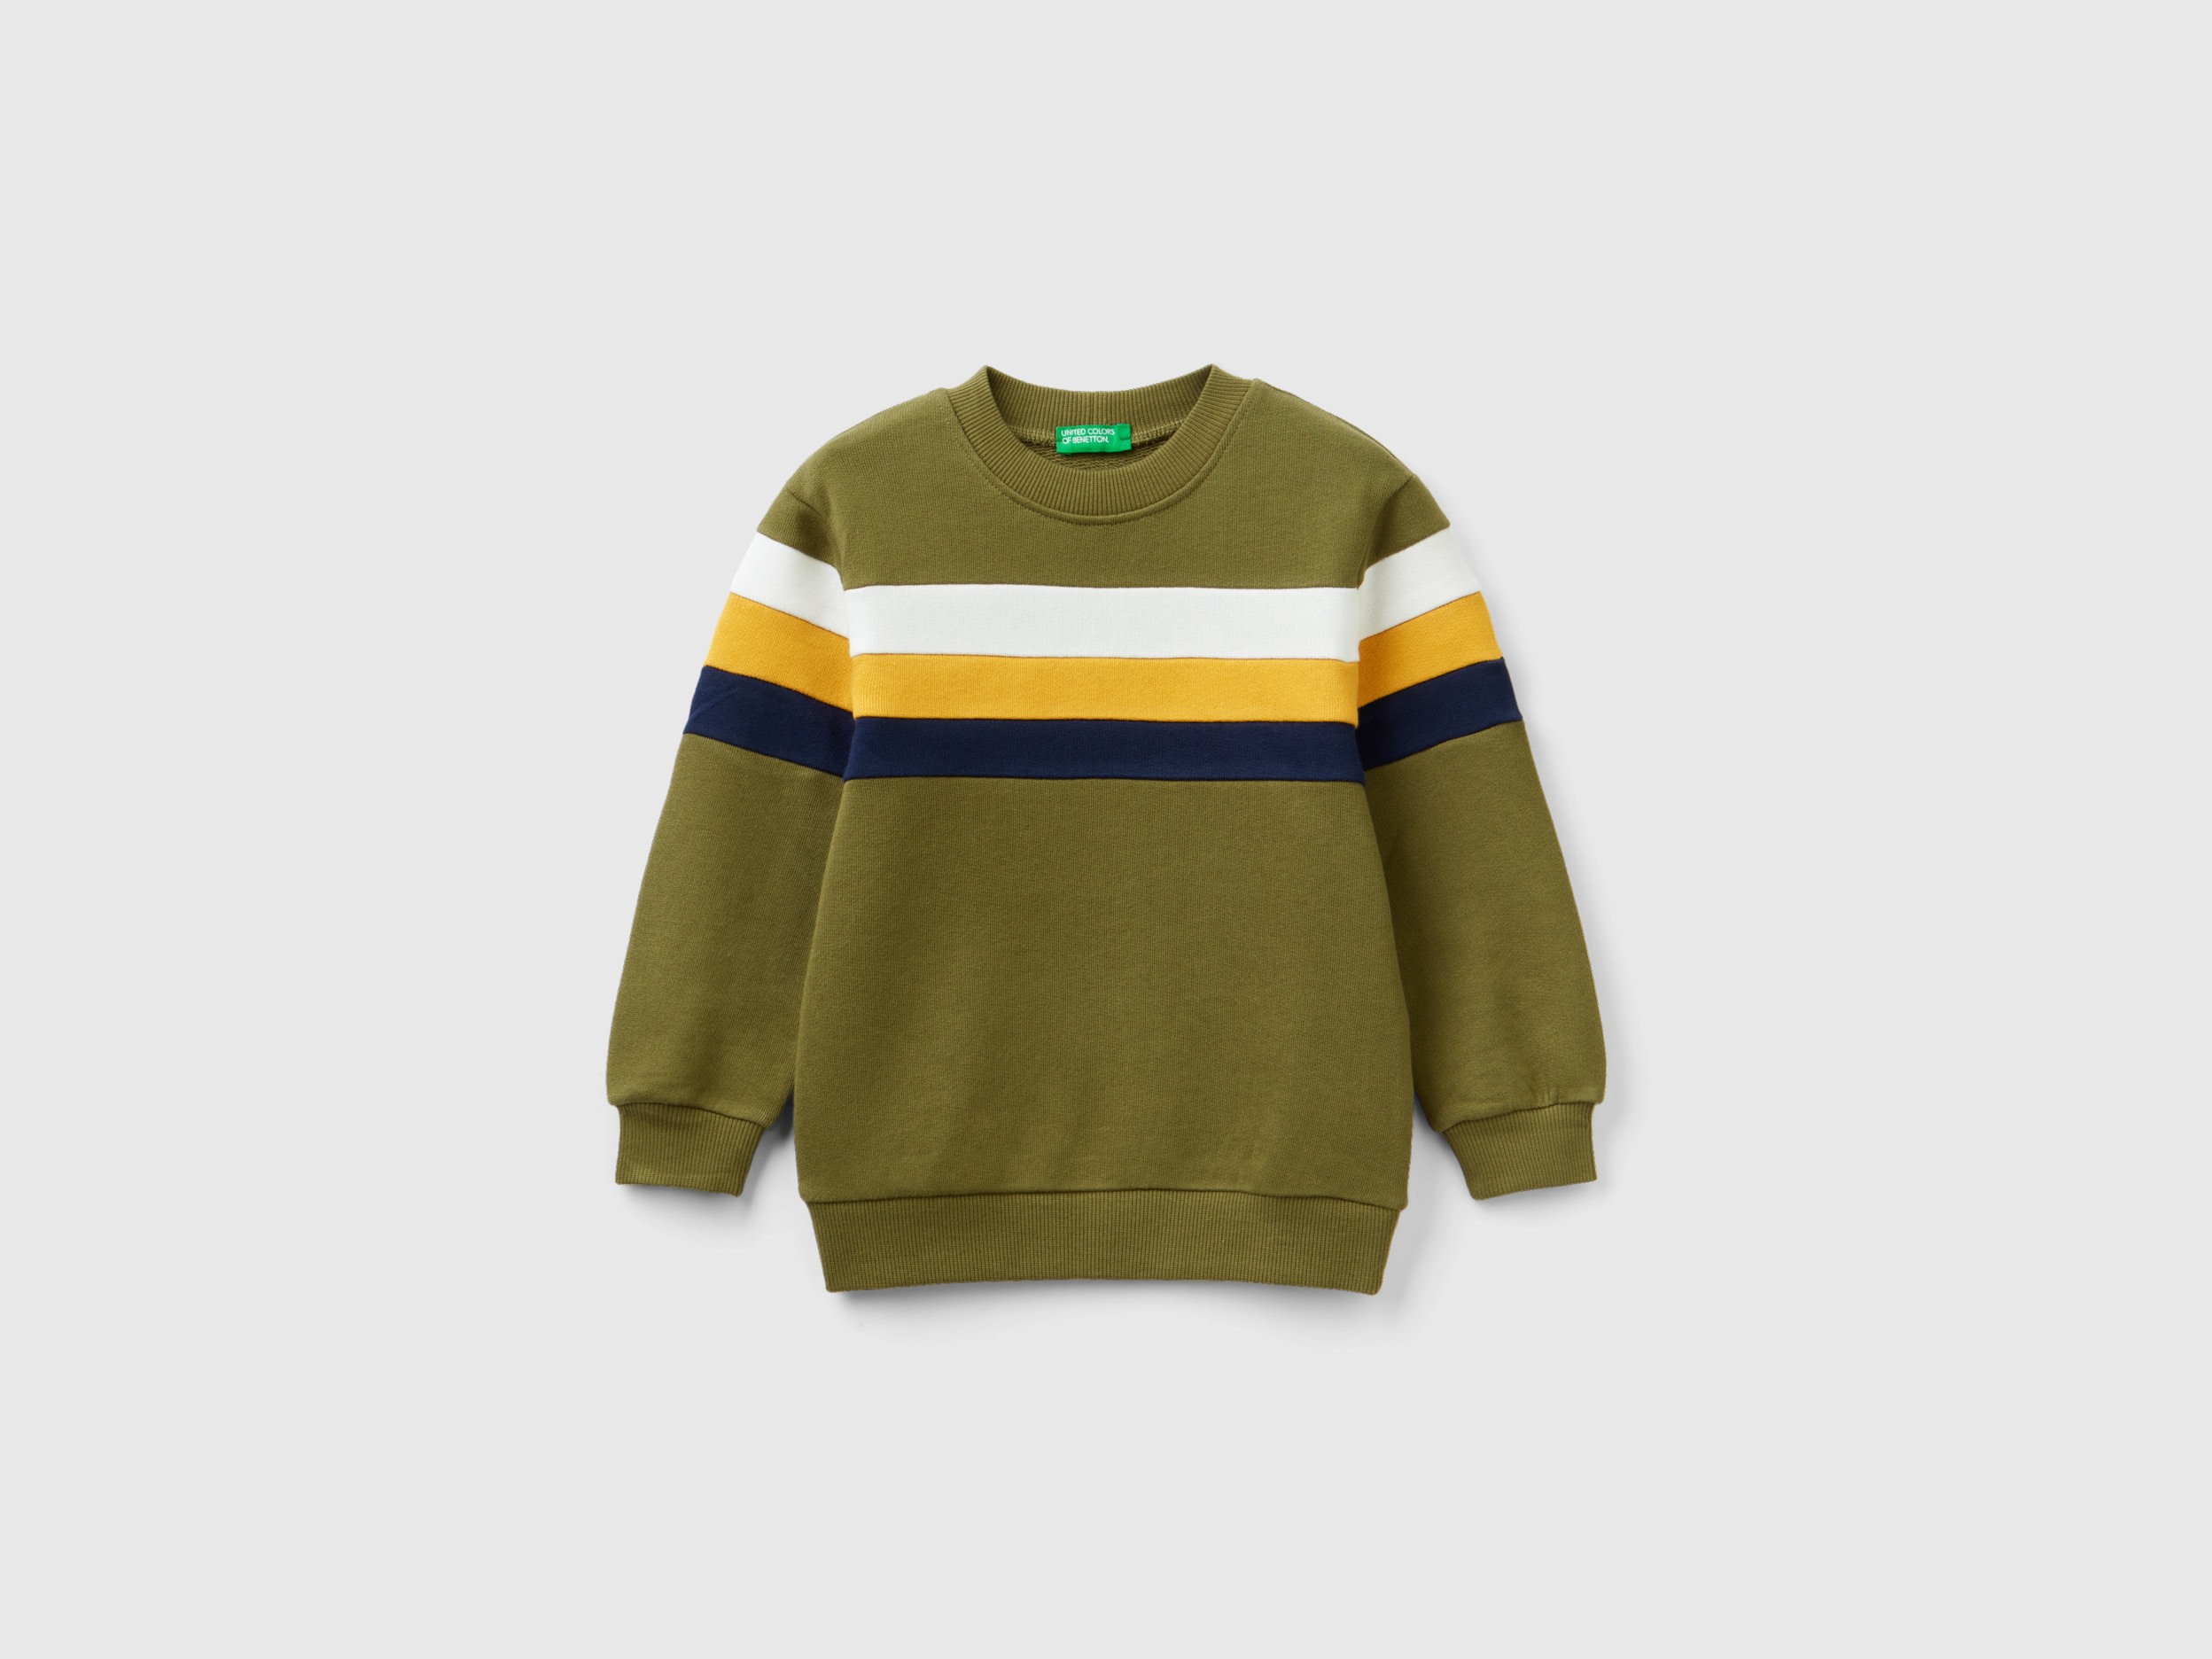 Benetton, Pullover Sweatshirt With Striped Band, size 12-18, Military Green, Kids